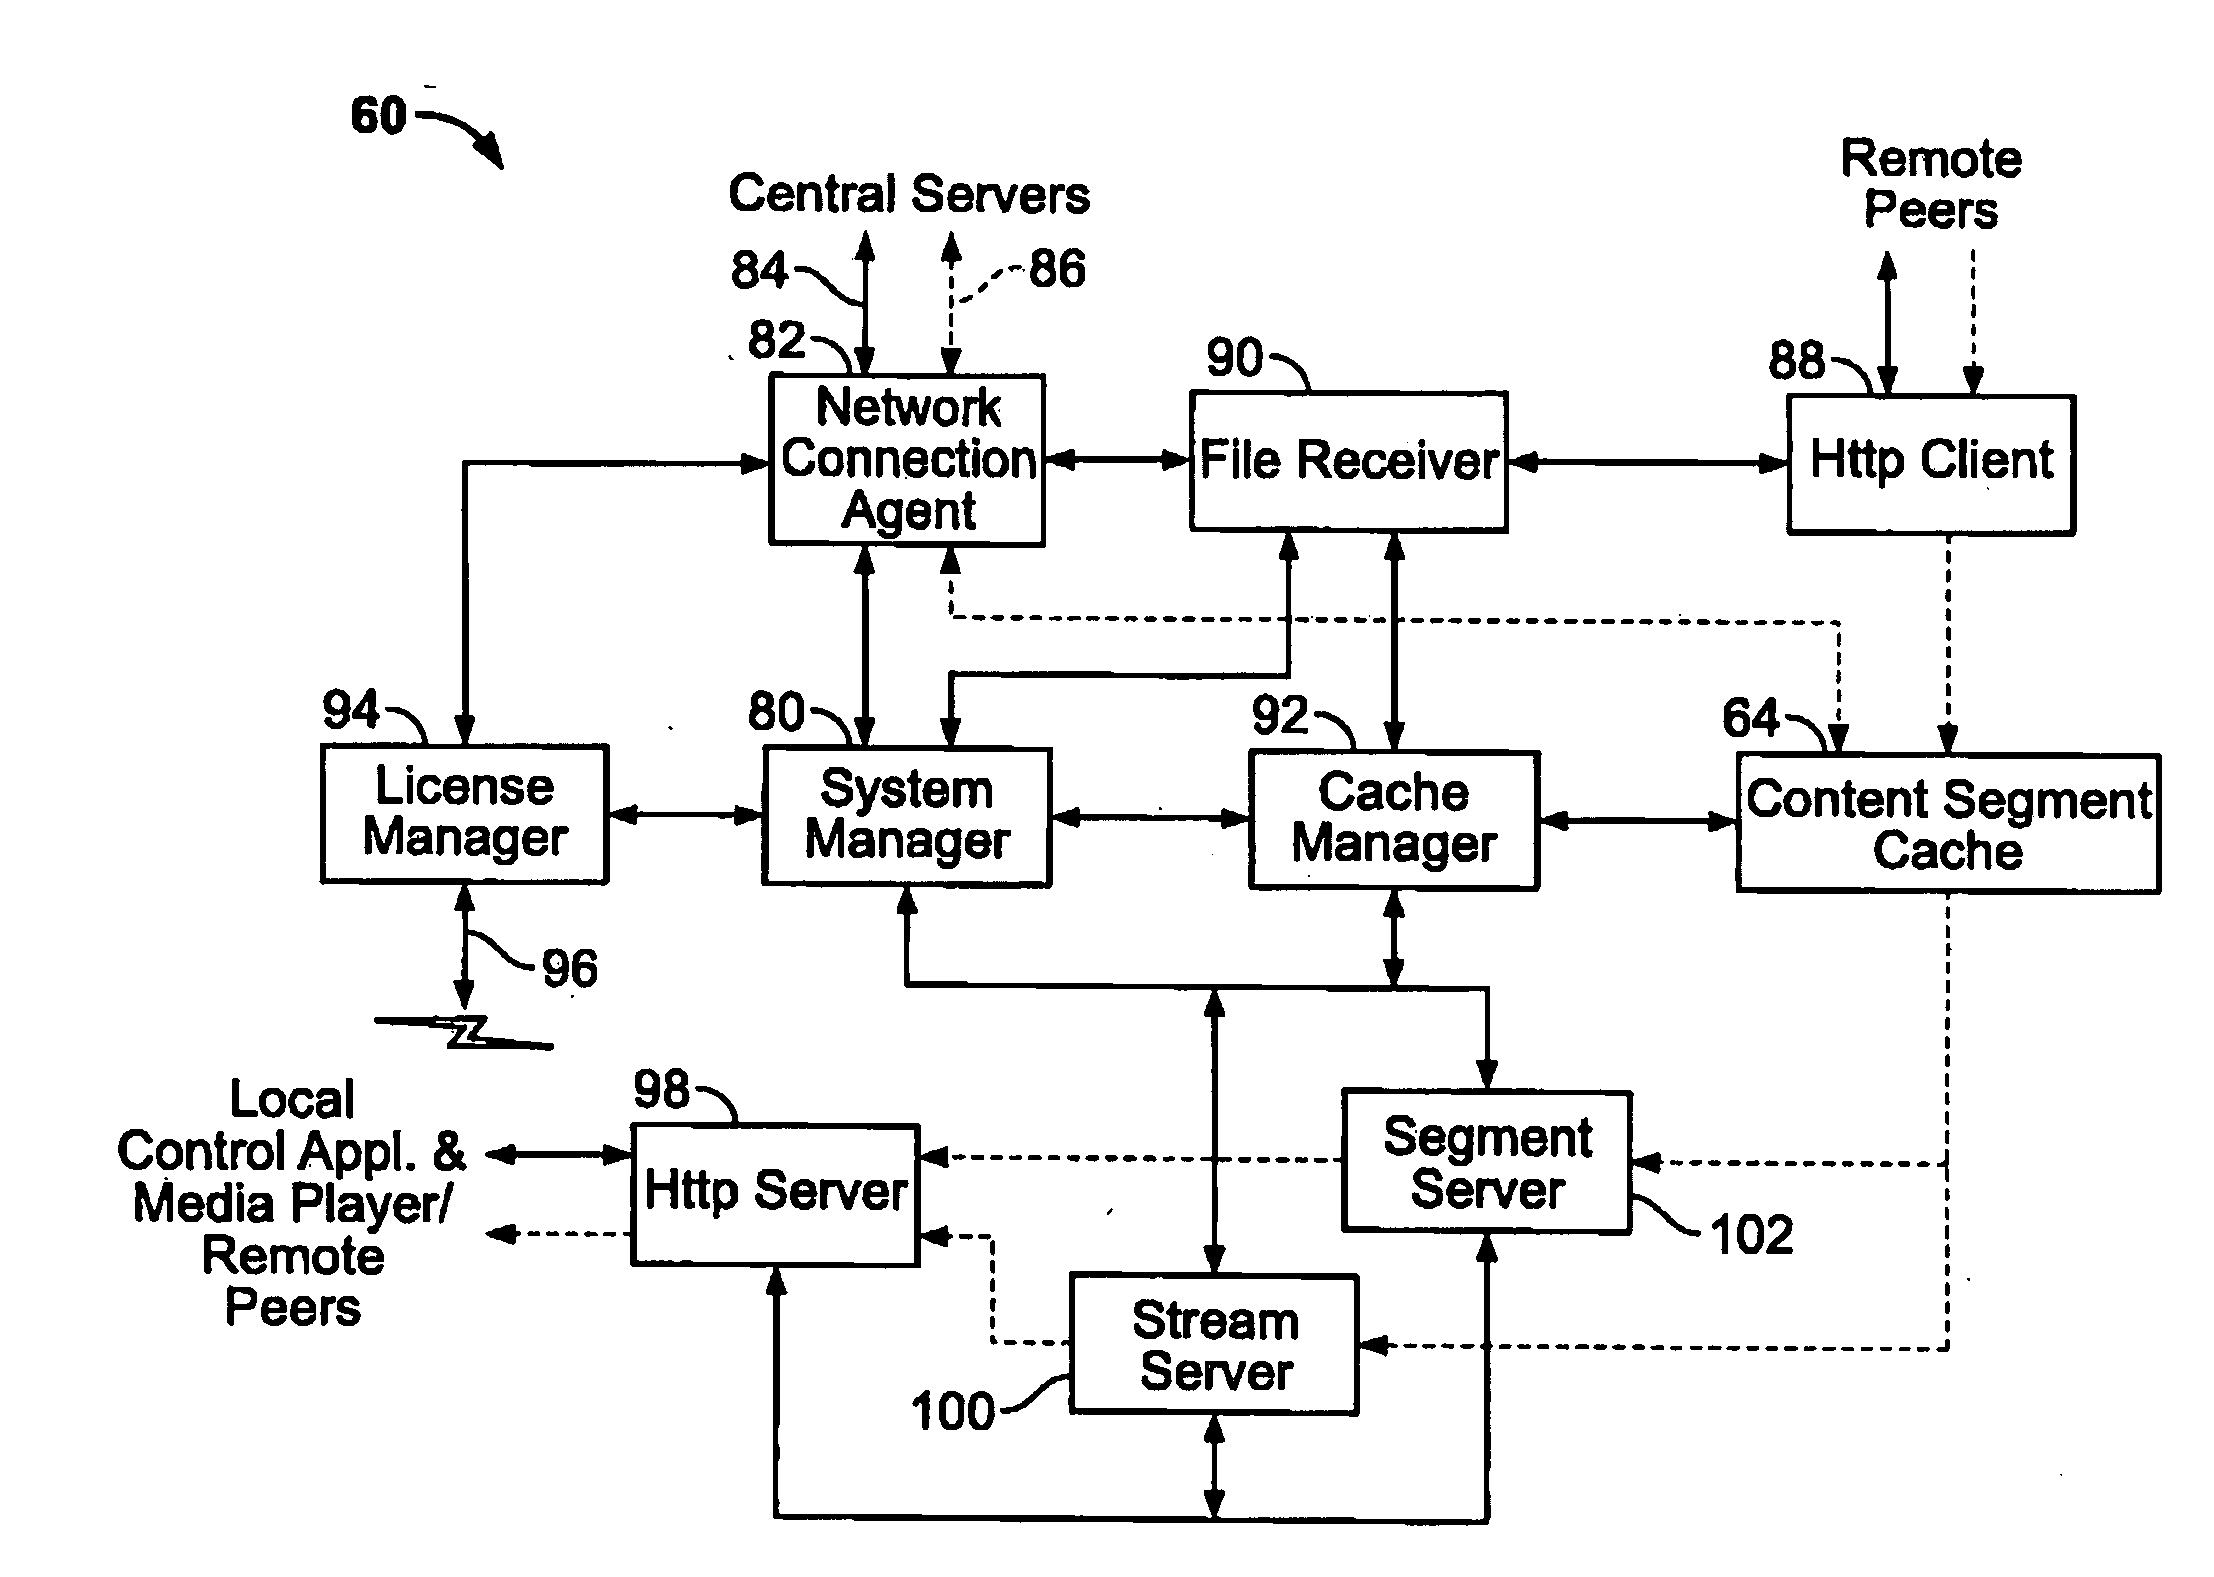 Centralized selection of peers as media data sources in a dispersed peer network